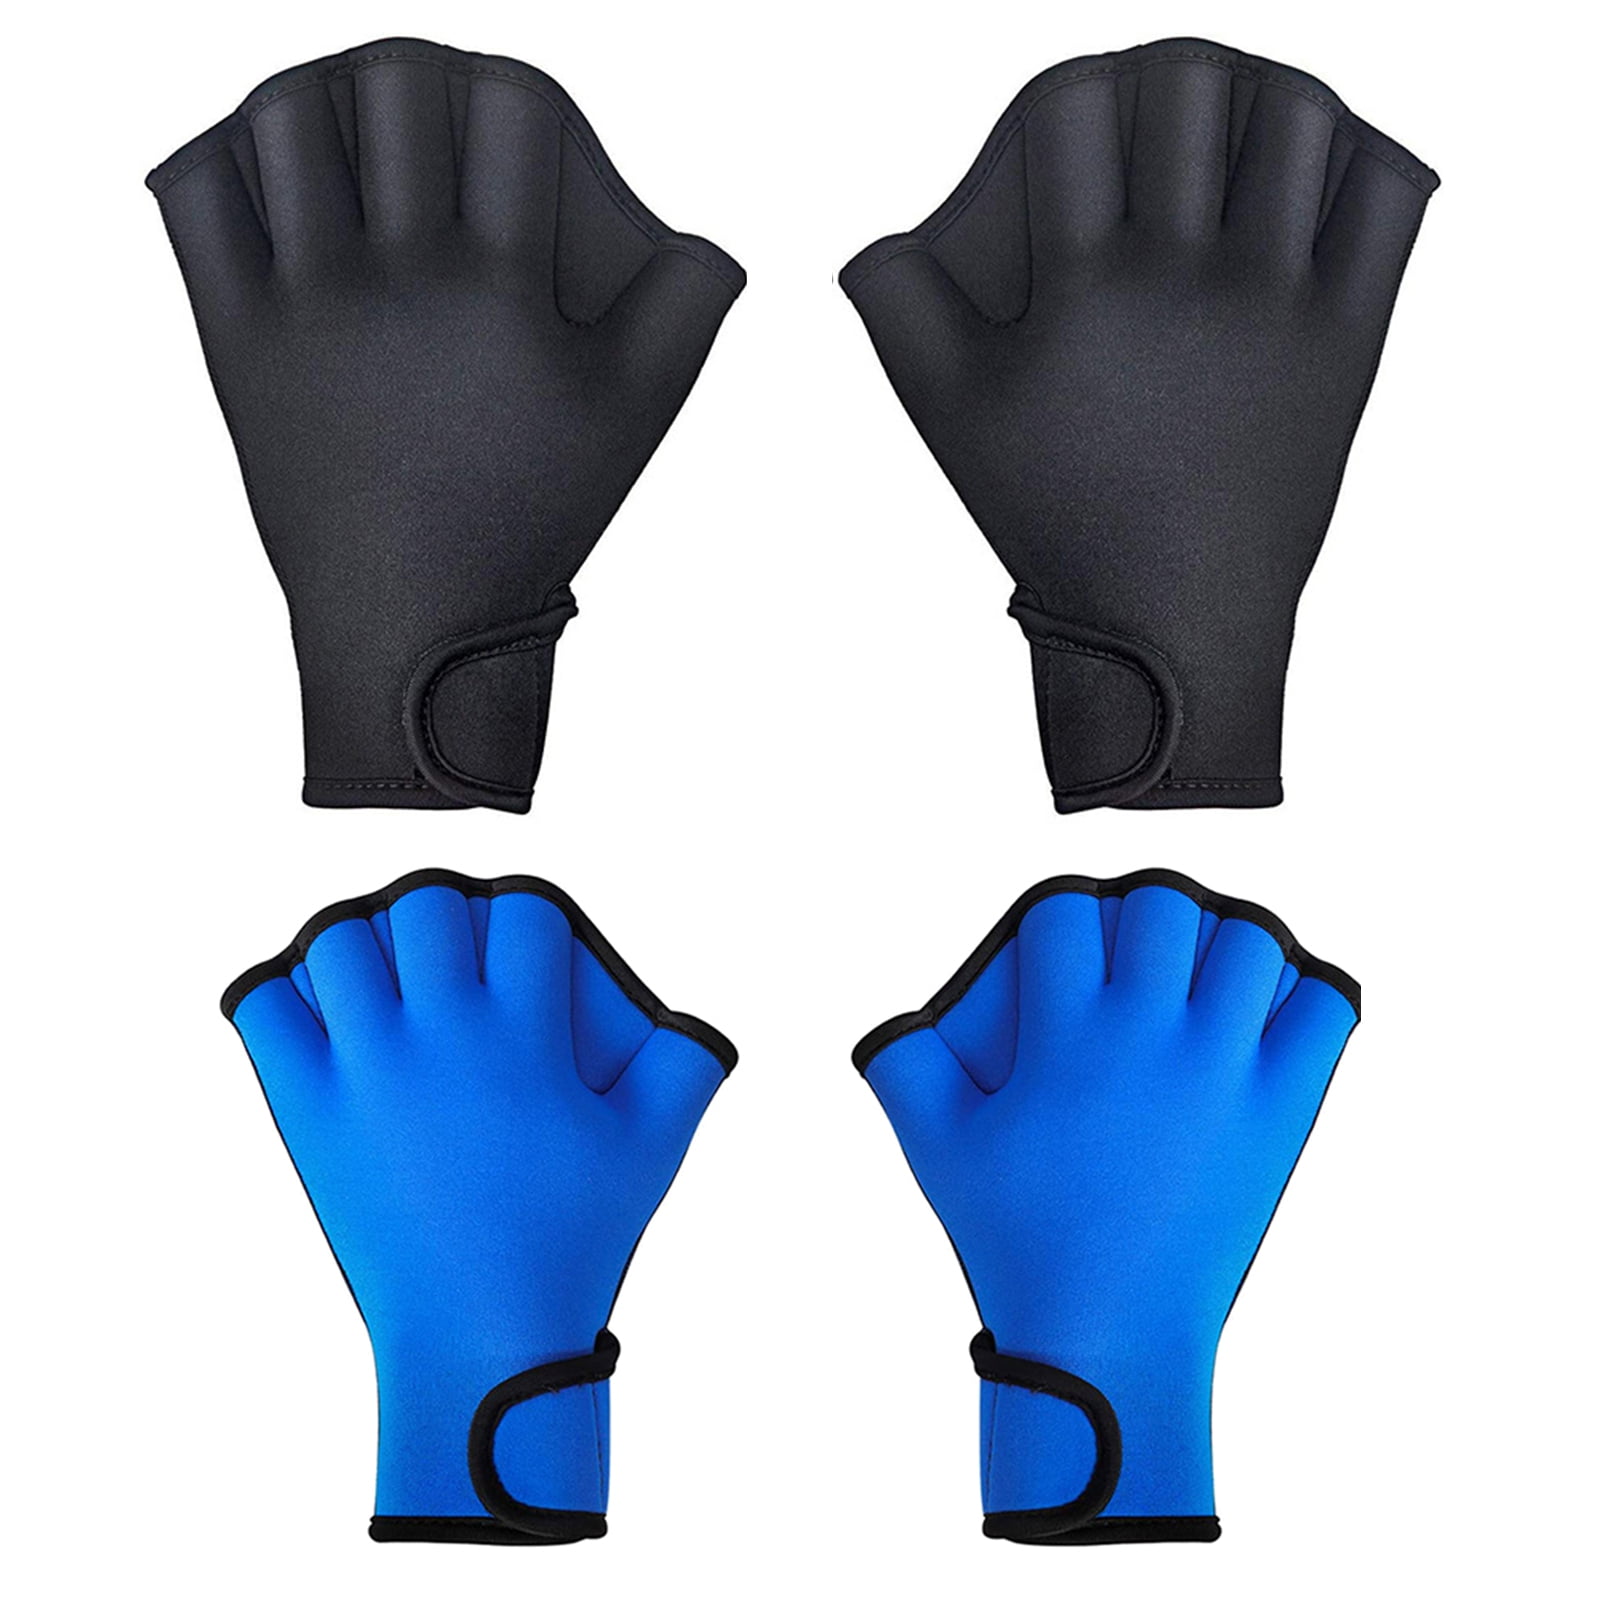 ATYAIDE Silicone Swim Aquatic Gloves 1 Pair Webbed Fingers Swim Gloves for Aquatic Fitness Water Resistance Training Water Fit Sports 